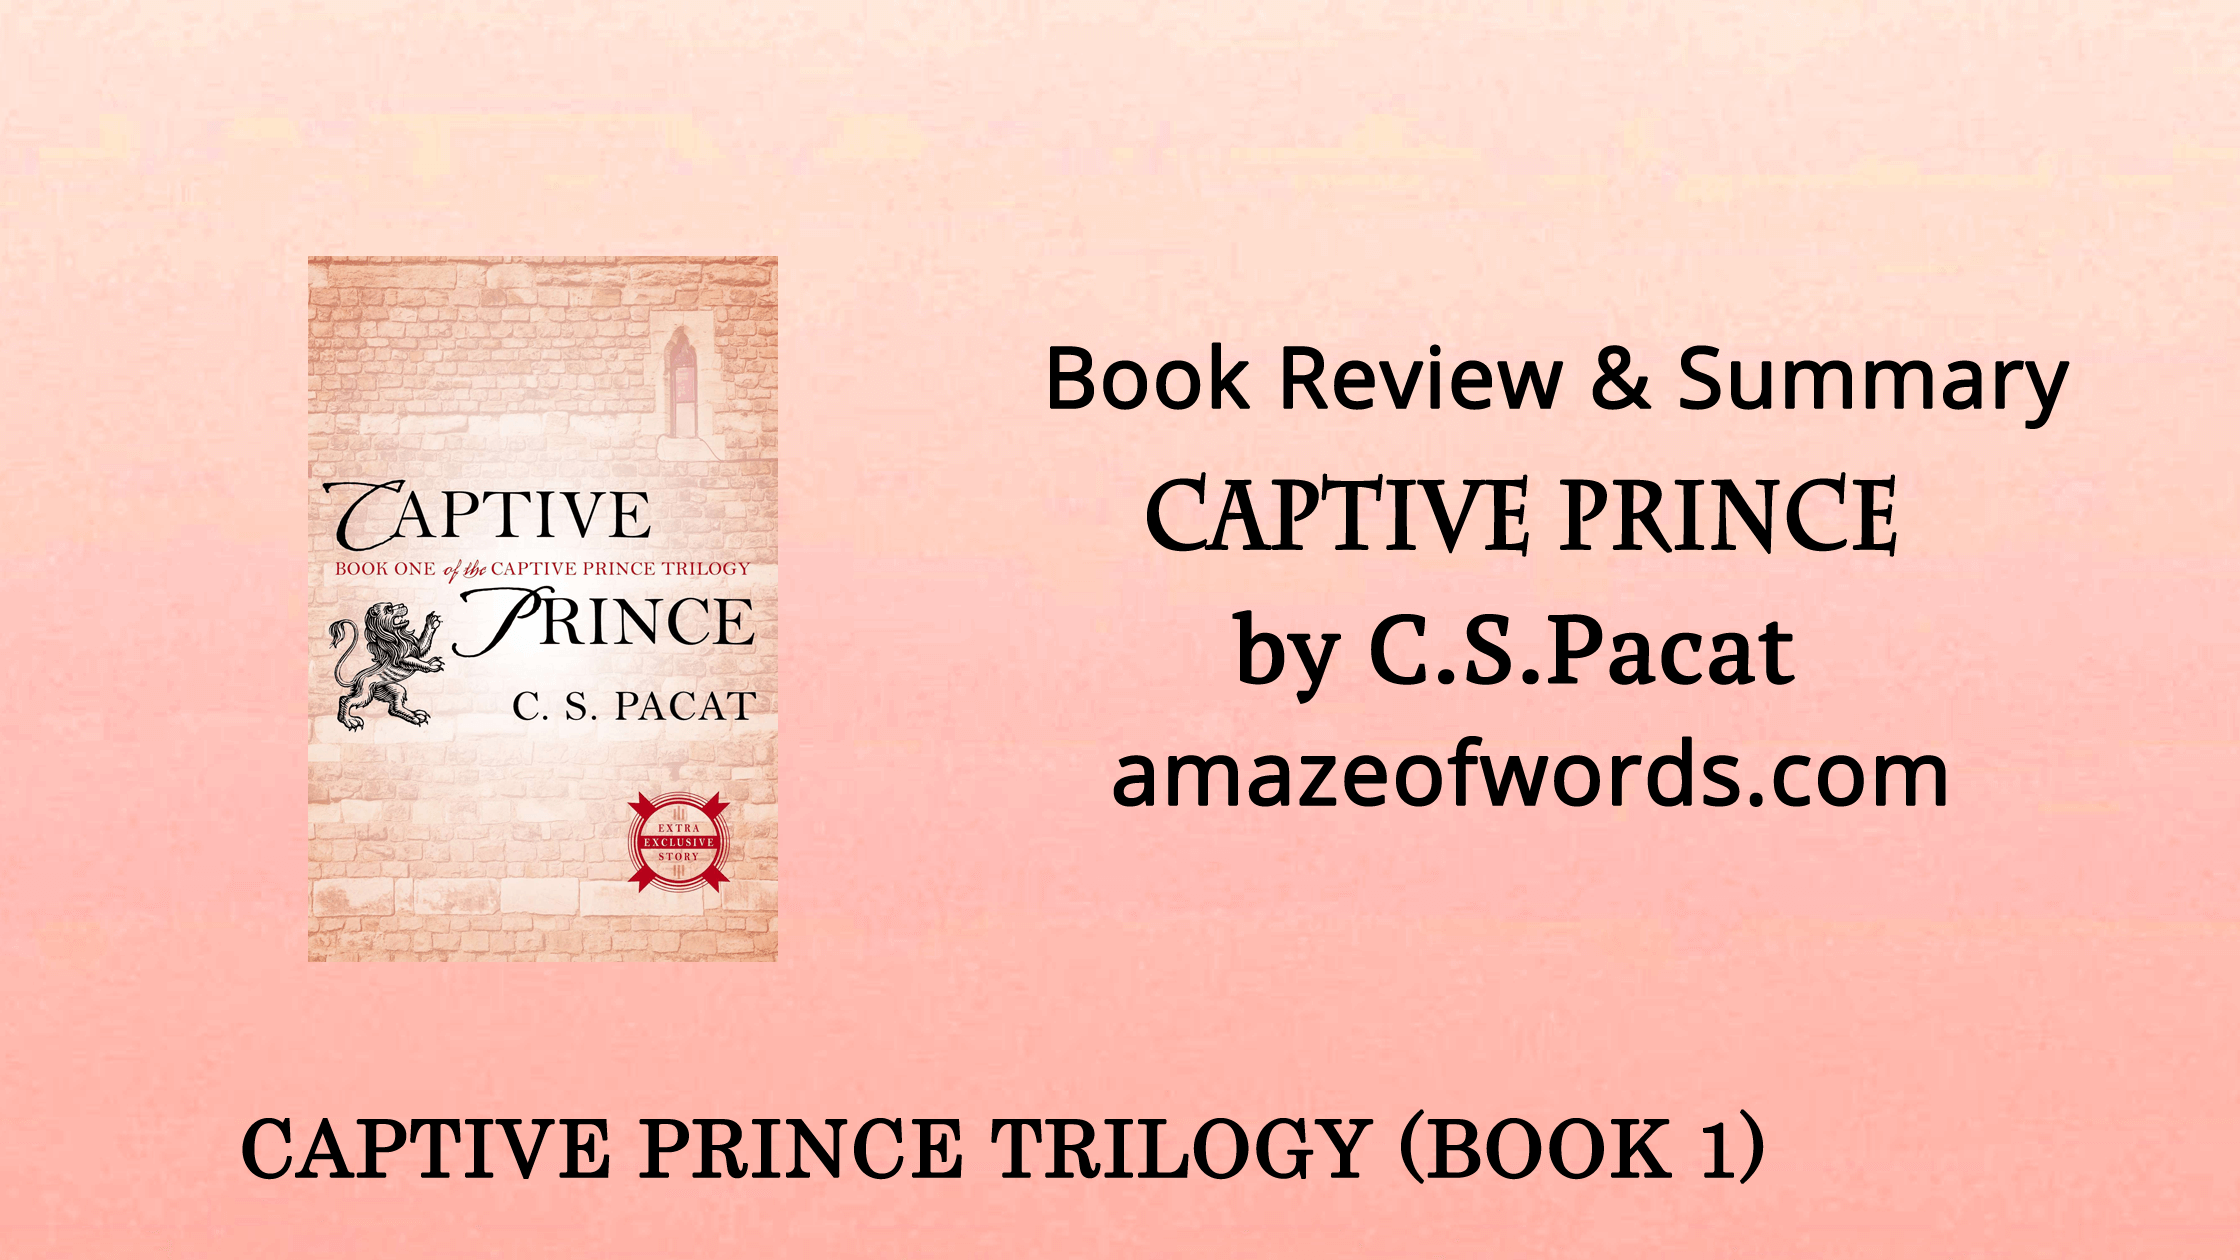 Captive Prince by C.S.Pacat — Book Review & Summary